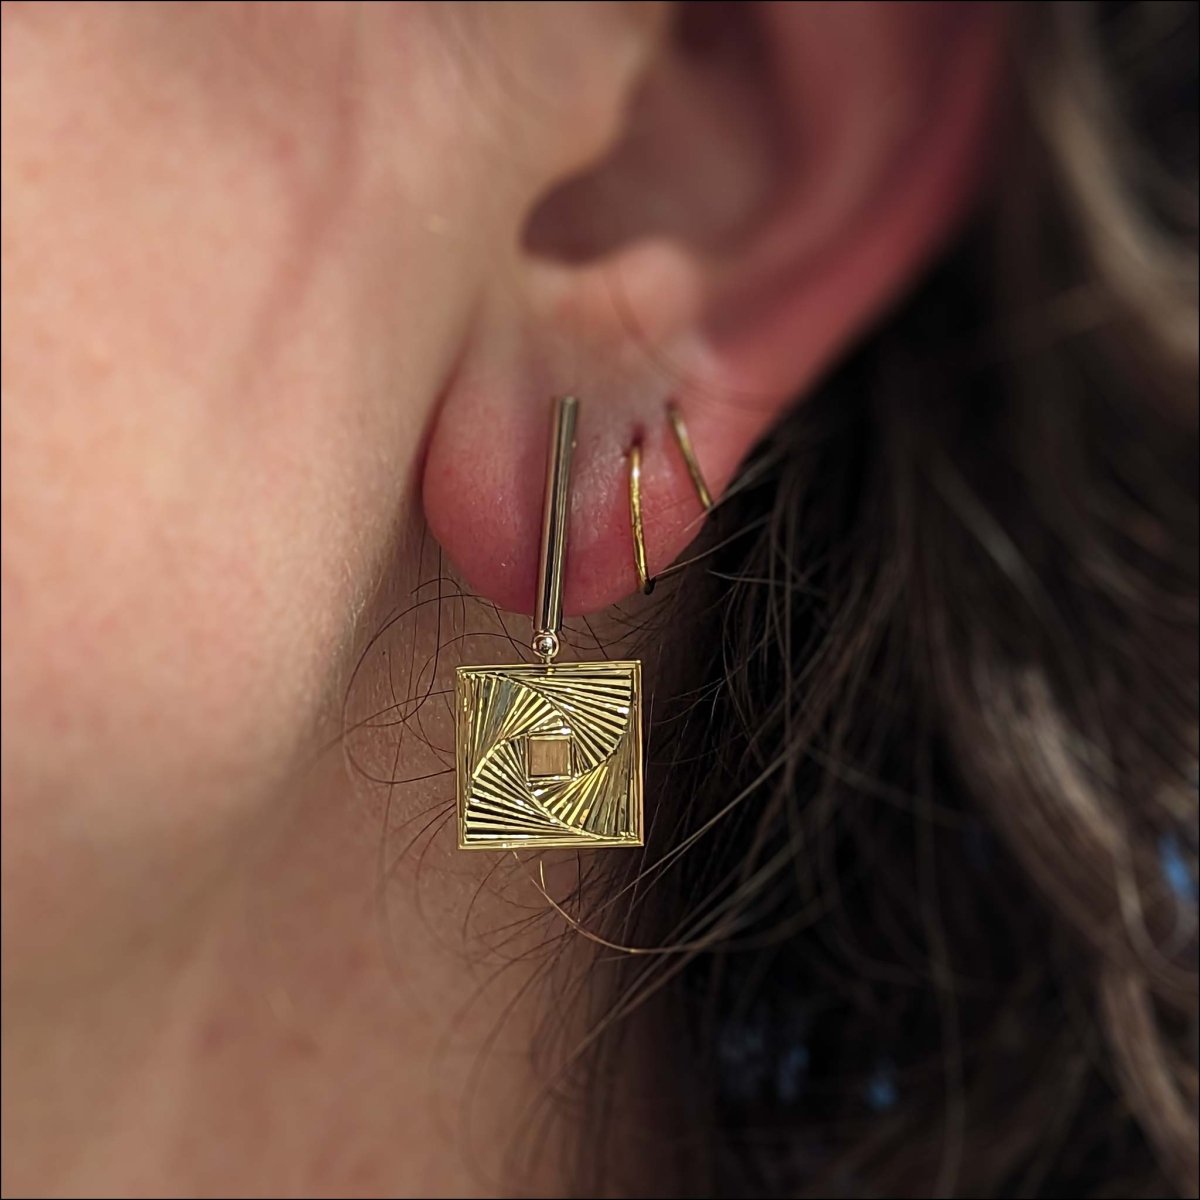 Hand Engraved Square Vortex Earrings 18KY 14KW Entry #1 - JewelsmithEarrings